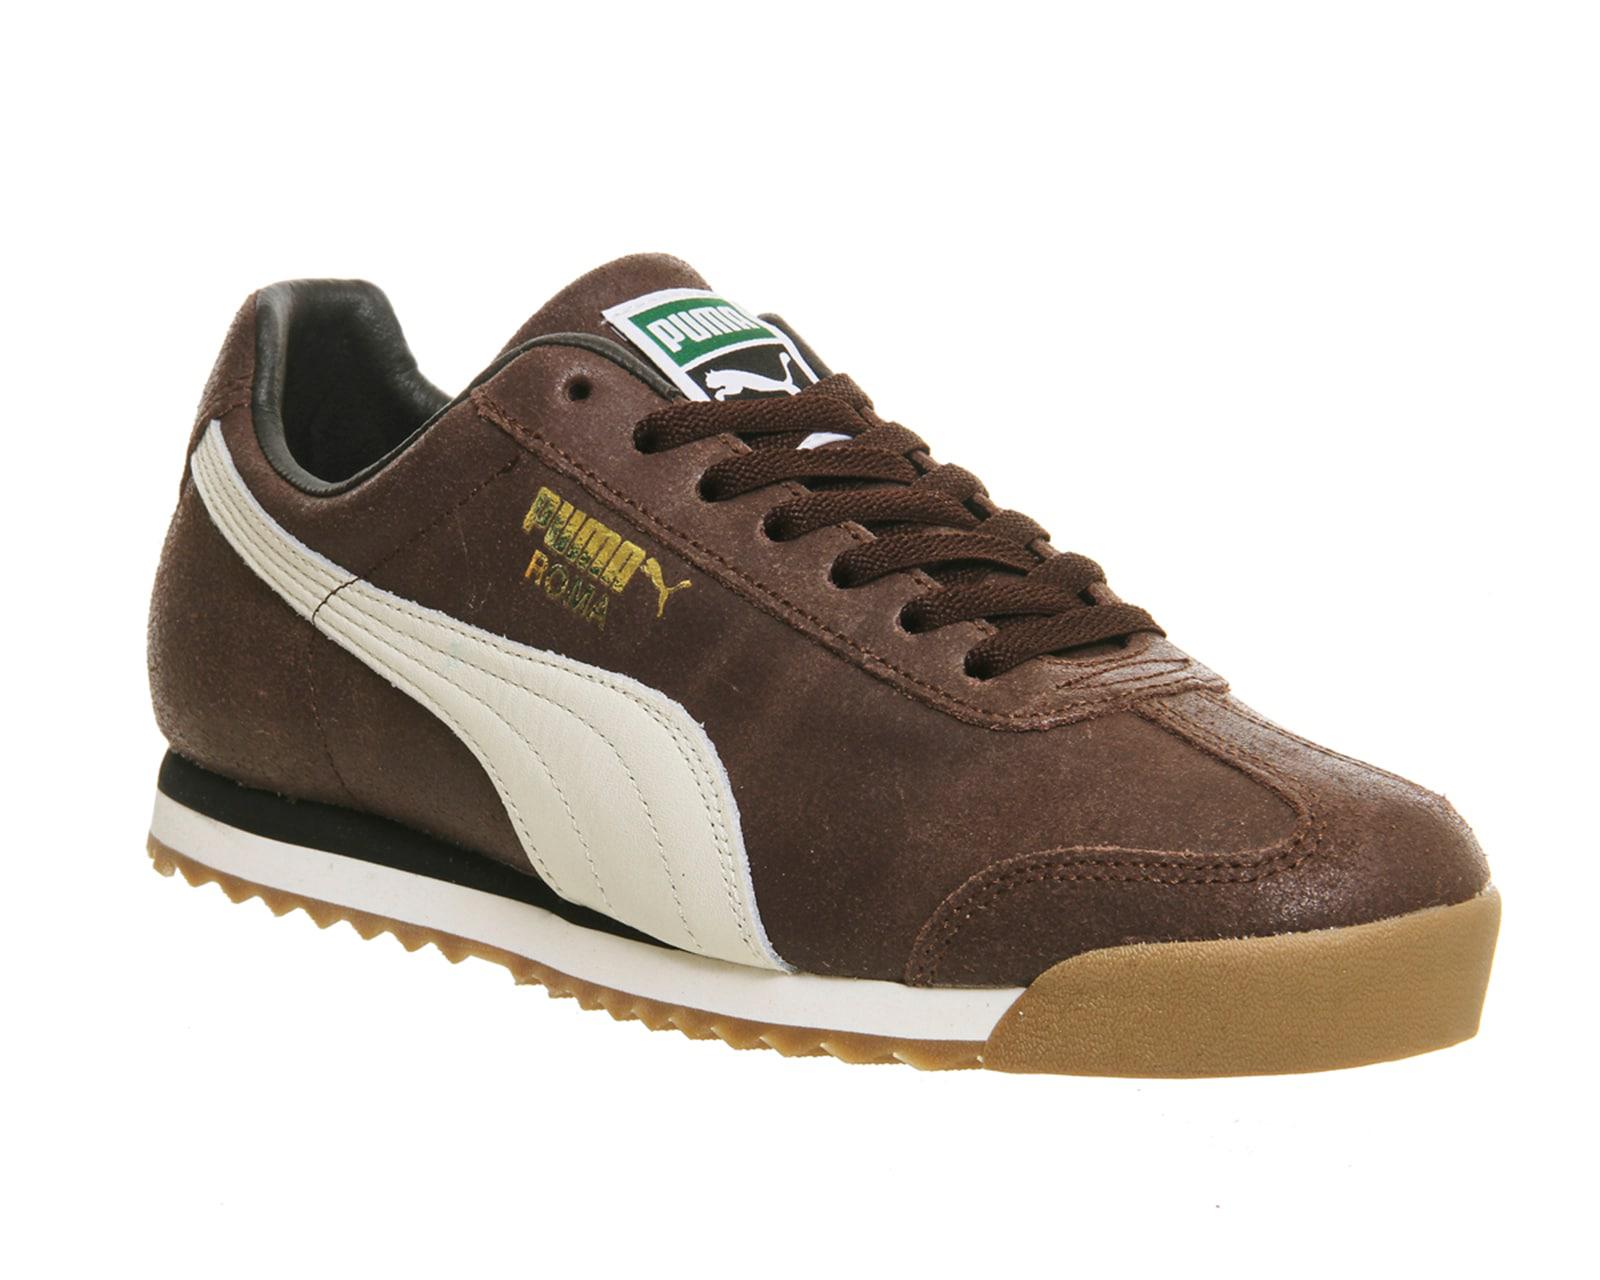 PUMA Suede Roma in Brown (White) for Men - Lyst